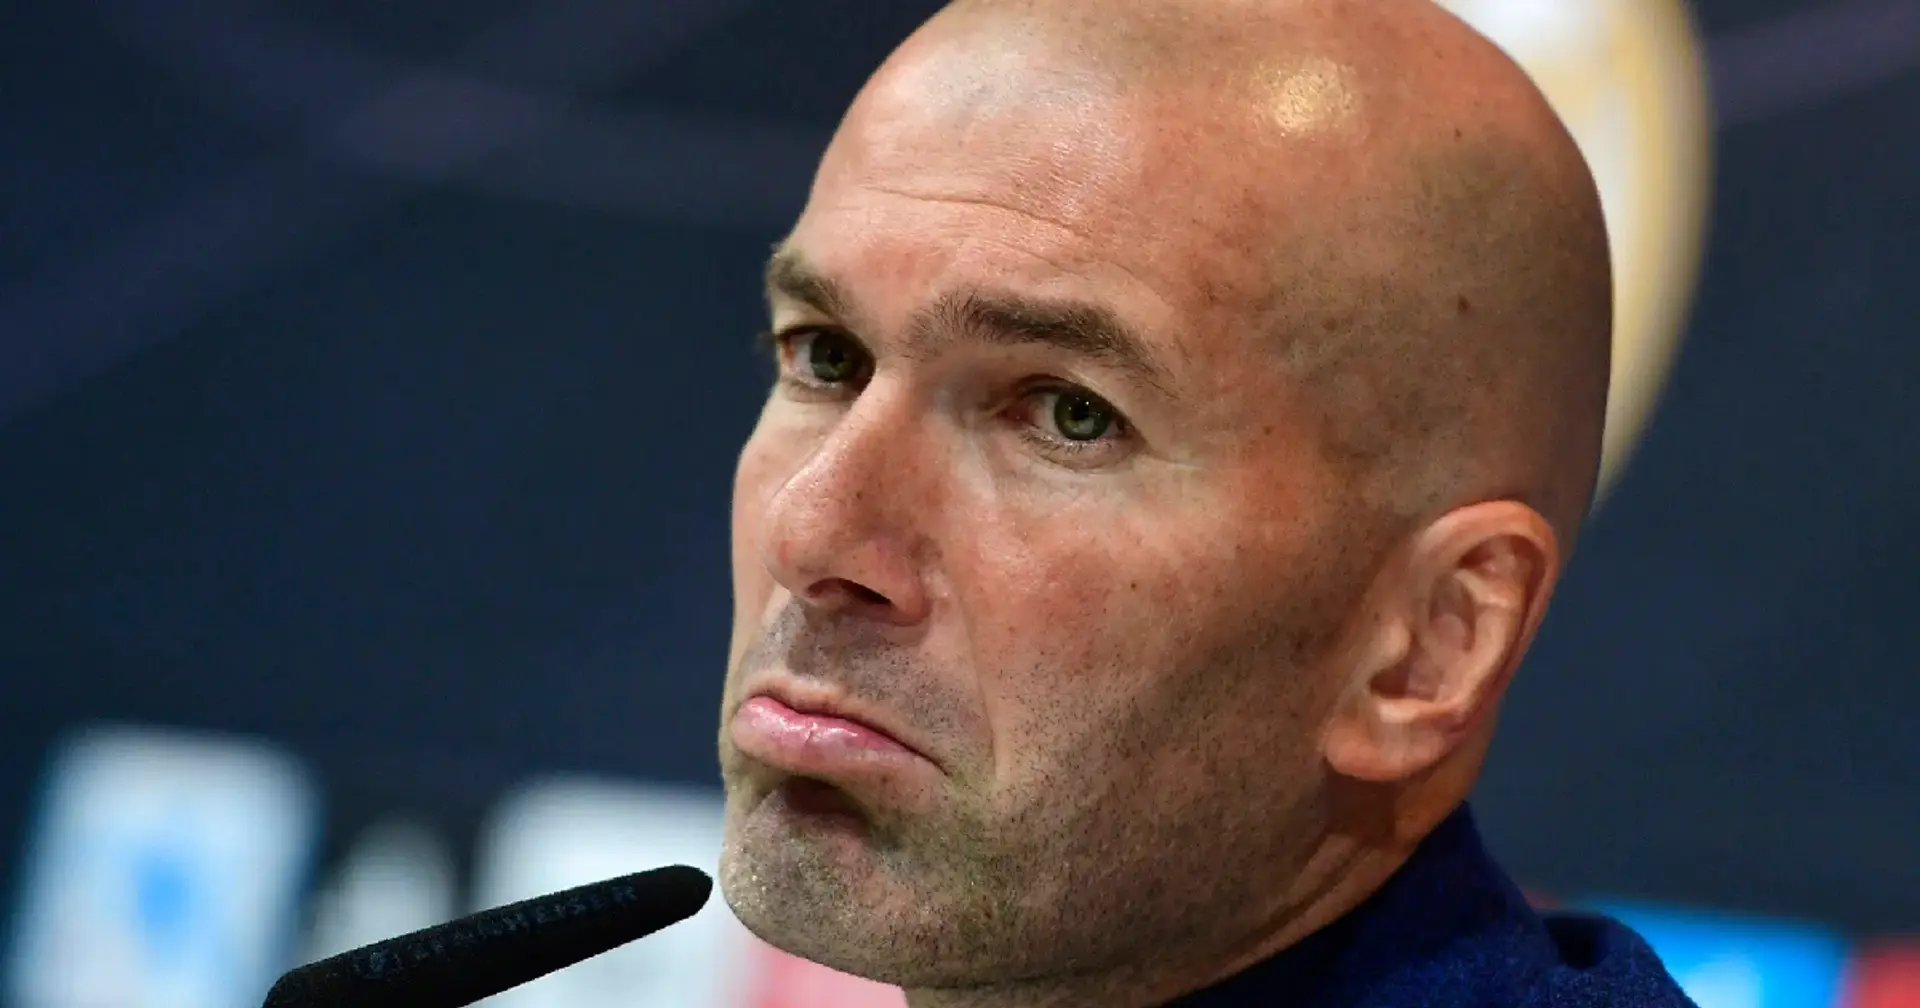 'All well and good until this creates favoritism': Madridista explains why Zidane's selections could lead to a divide 